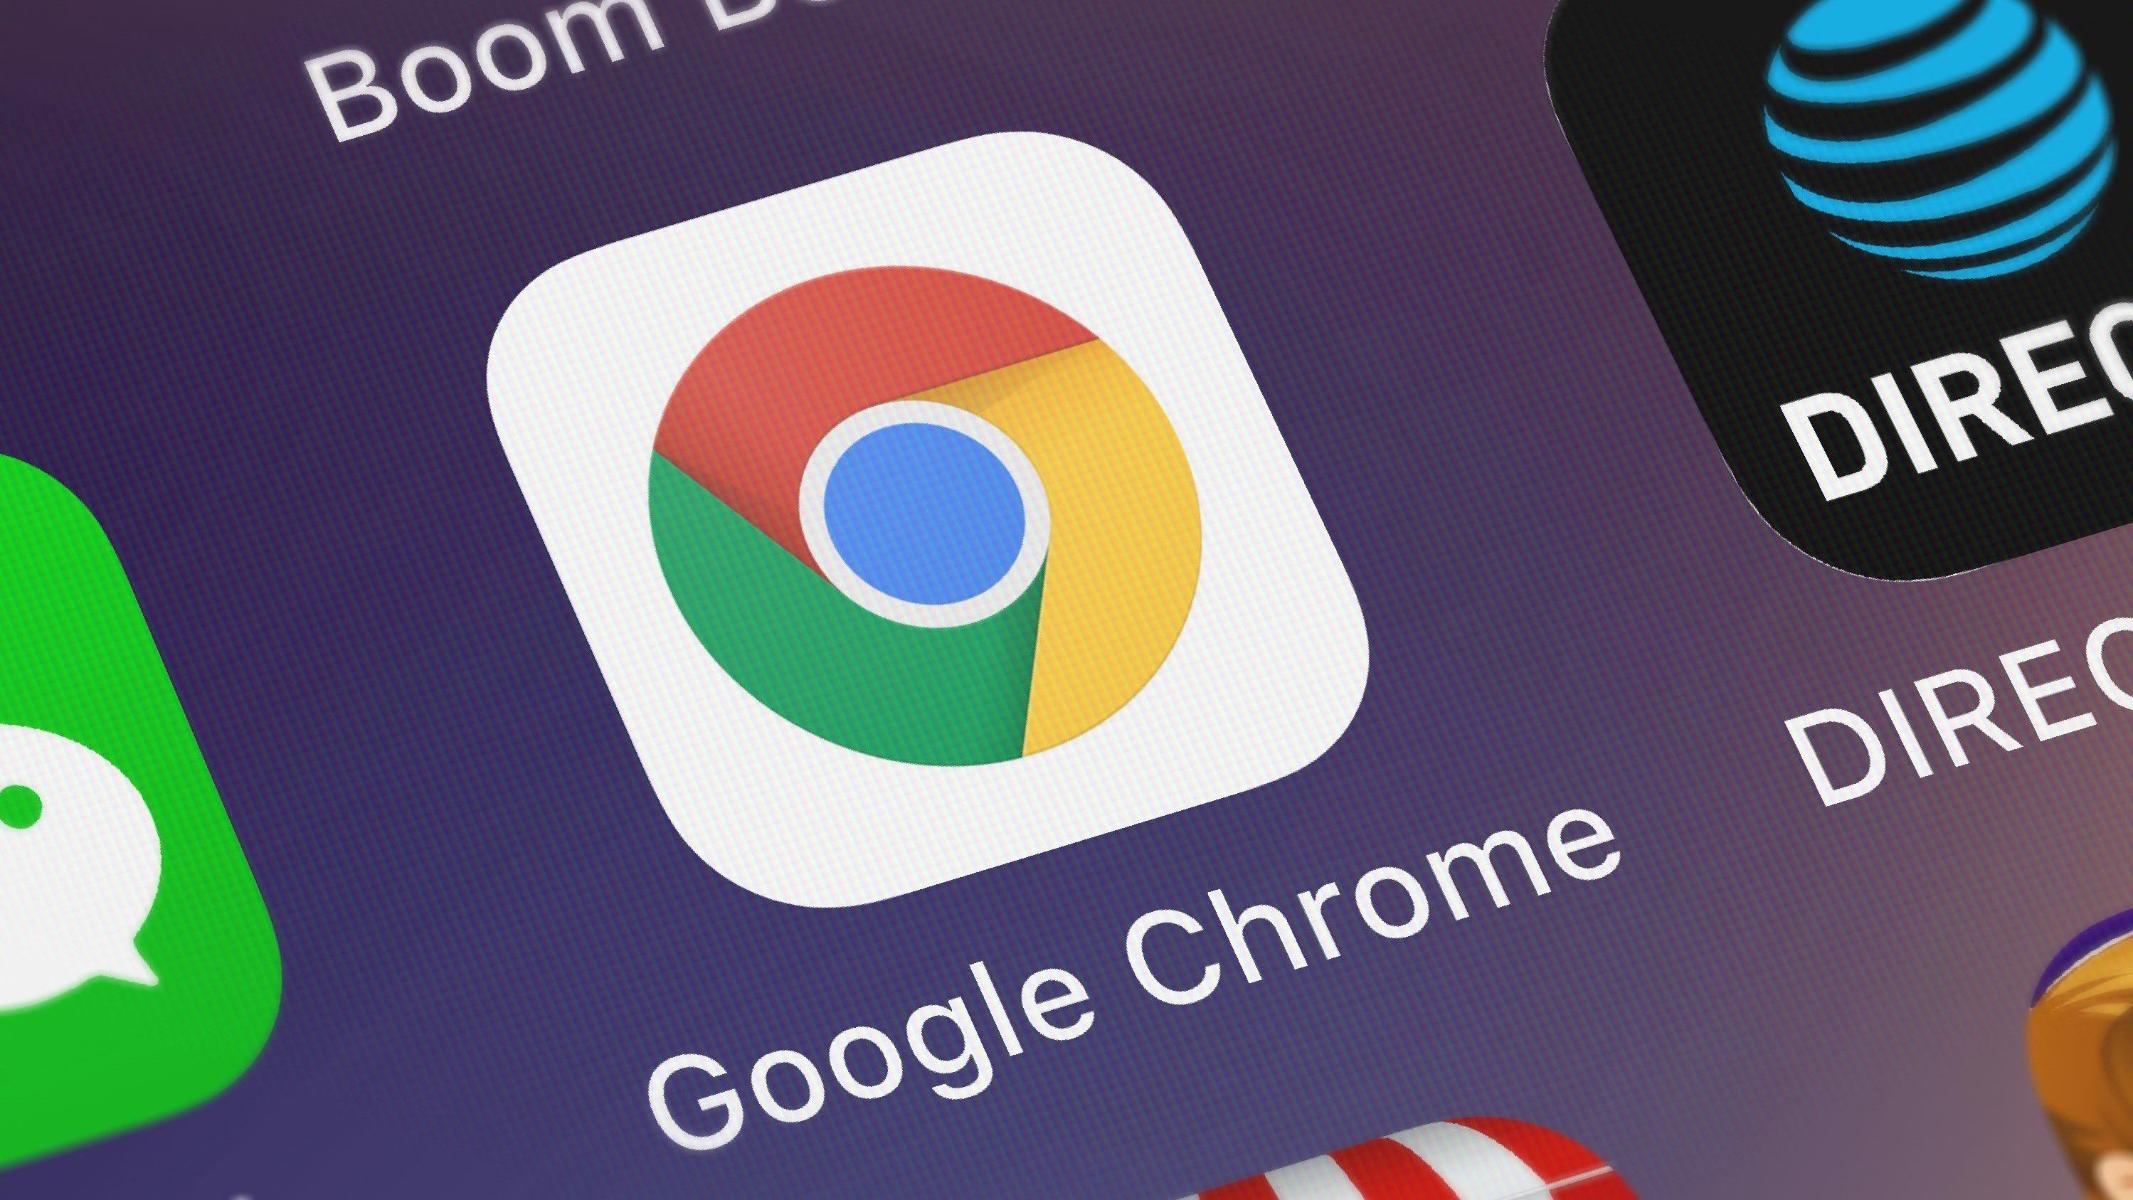 Android users will soon get fewer "File may be malicious" warnings in Chrome browser